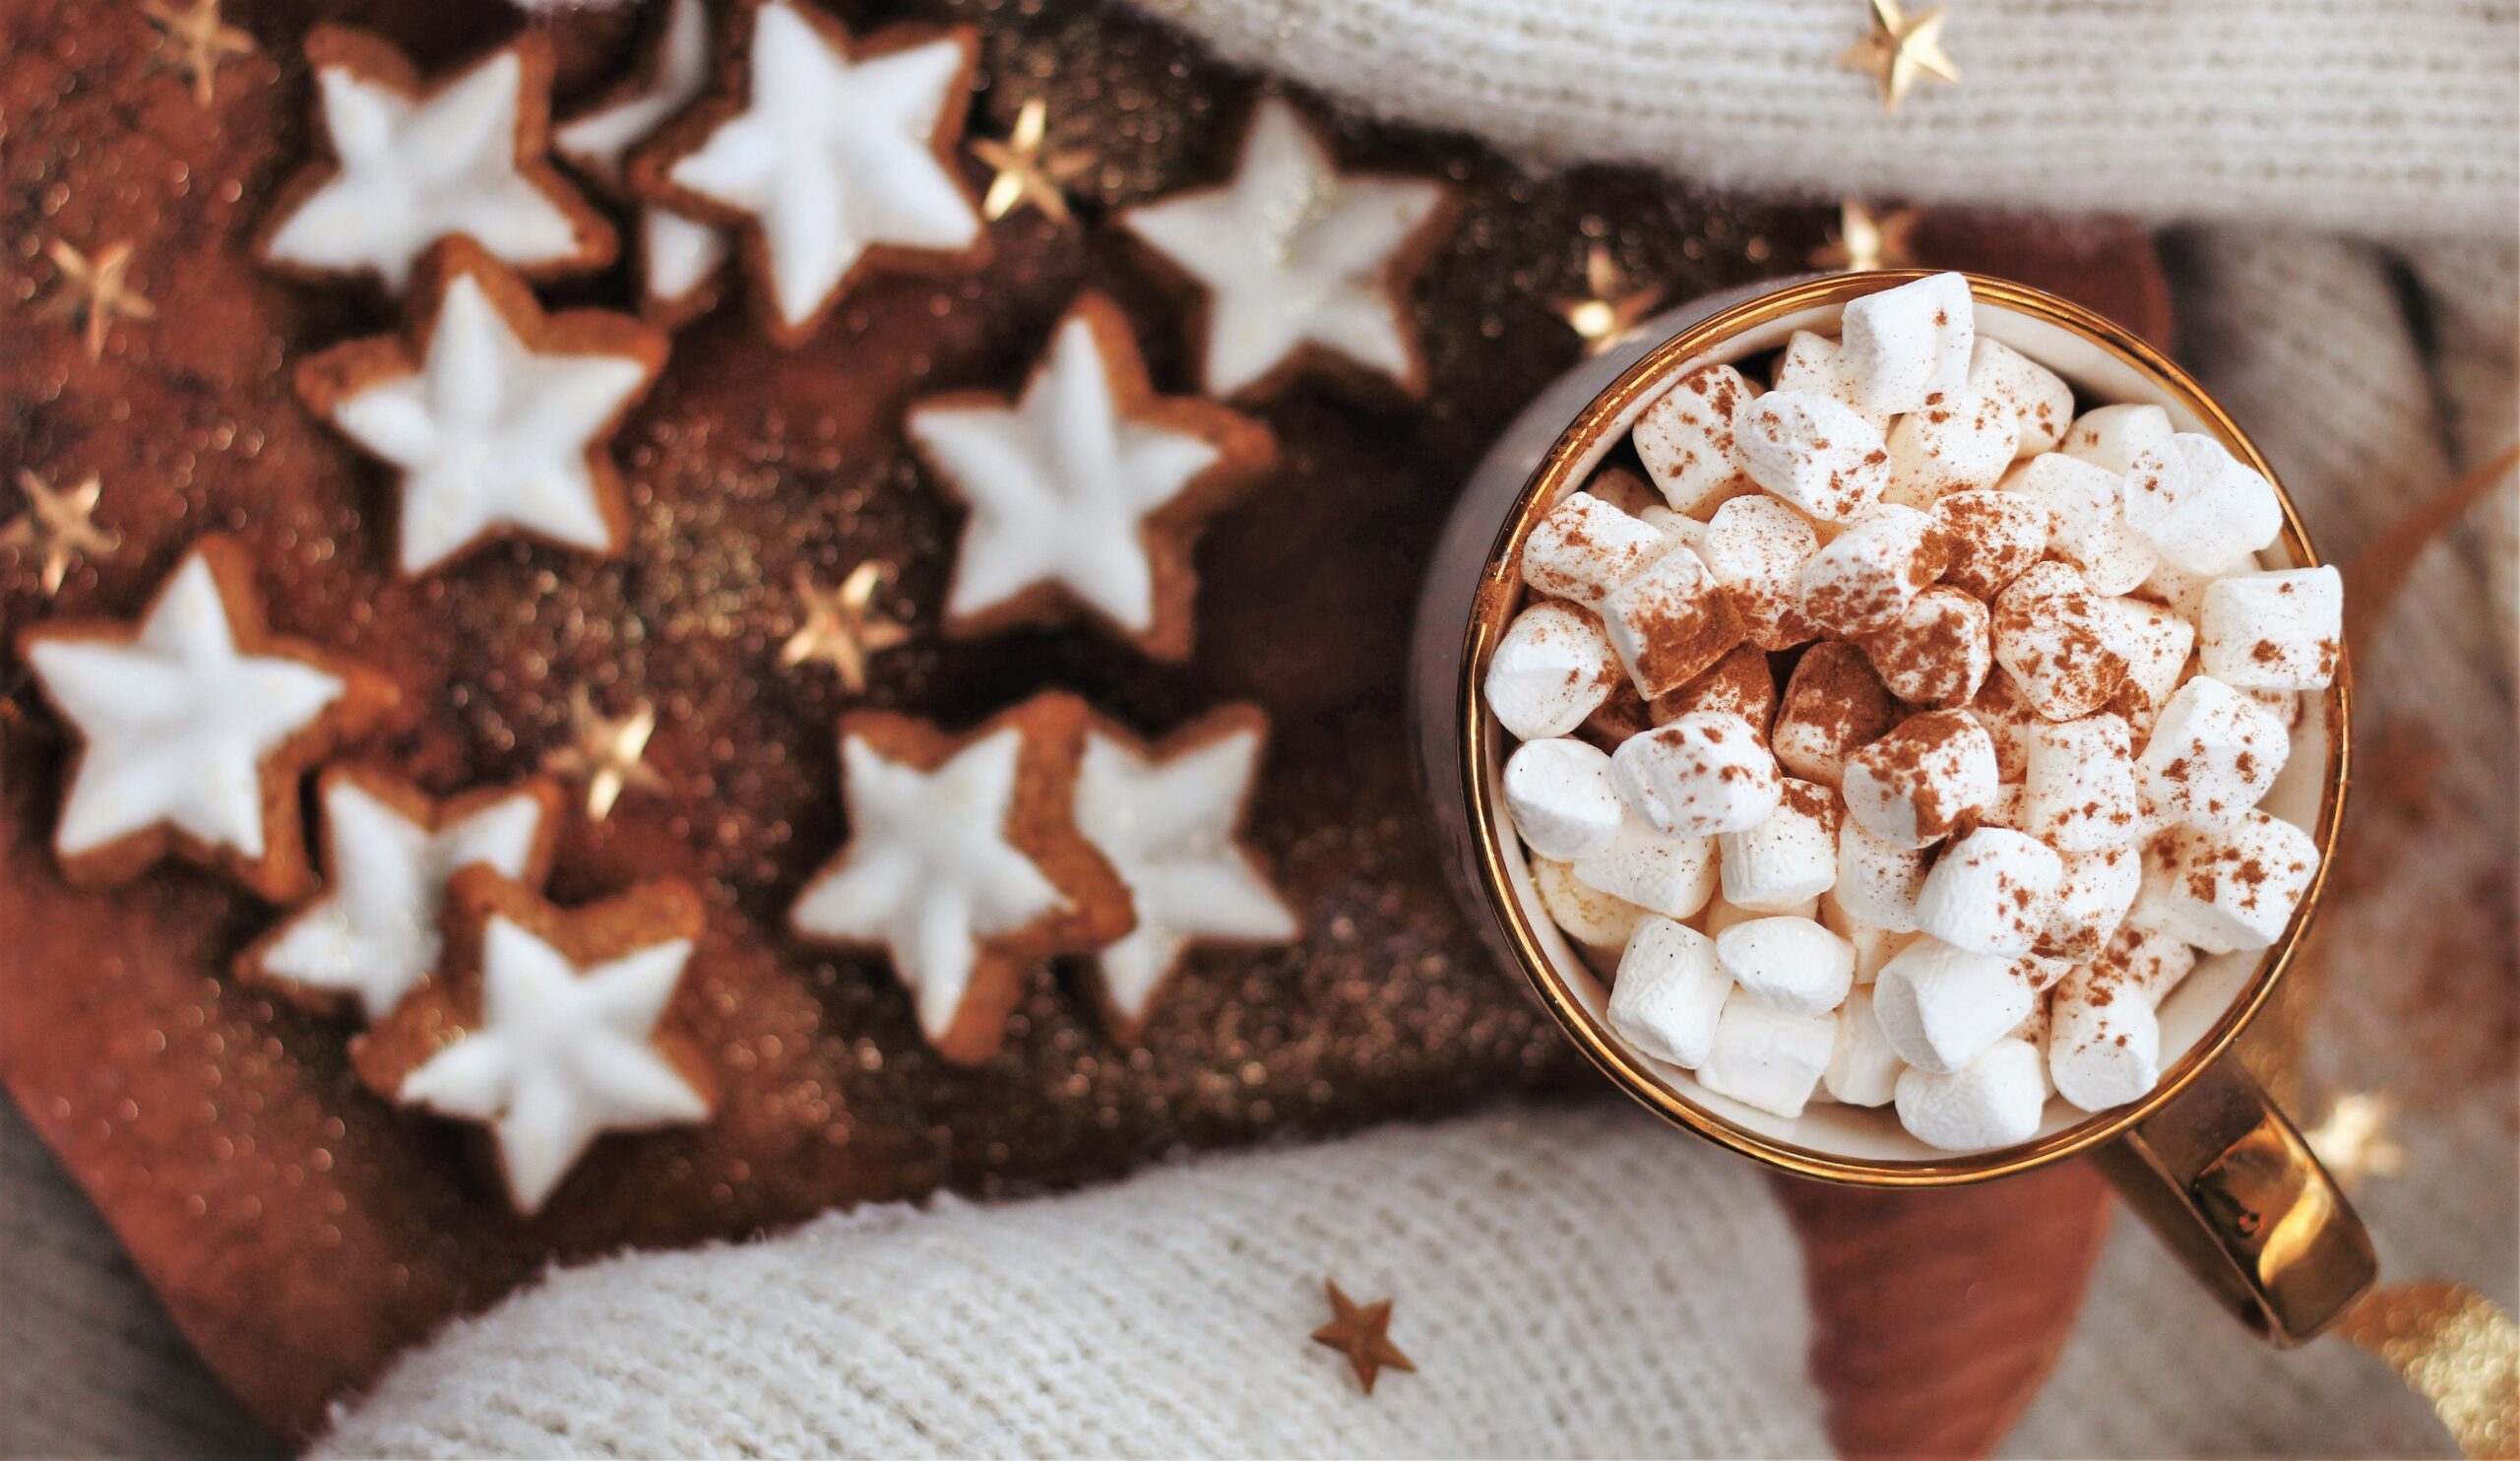 A cup of hot cocoa with lots of mini marshmallows is resting on the sleeve of a white sweater, on a couch. Gingerbread cookies in the shape of stars and decorated with white